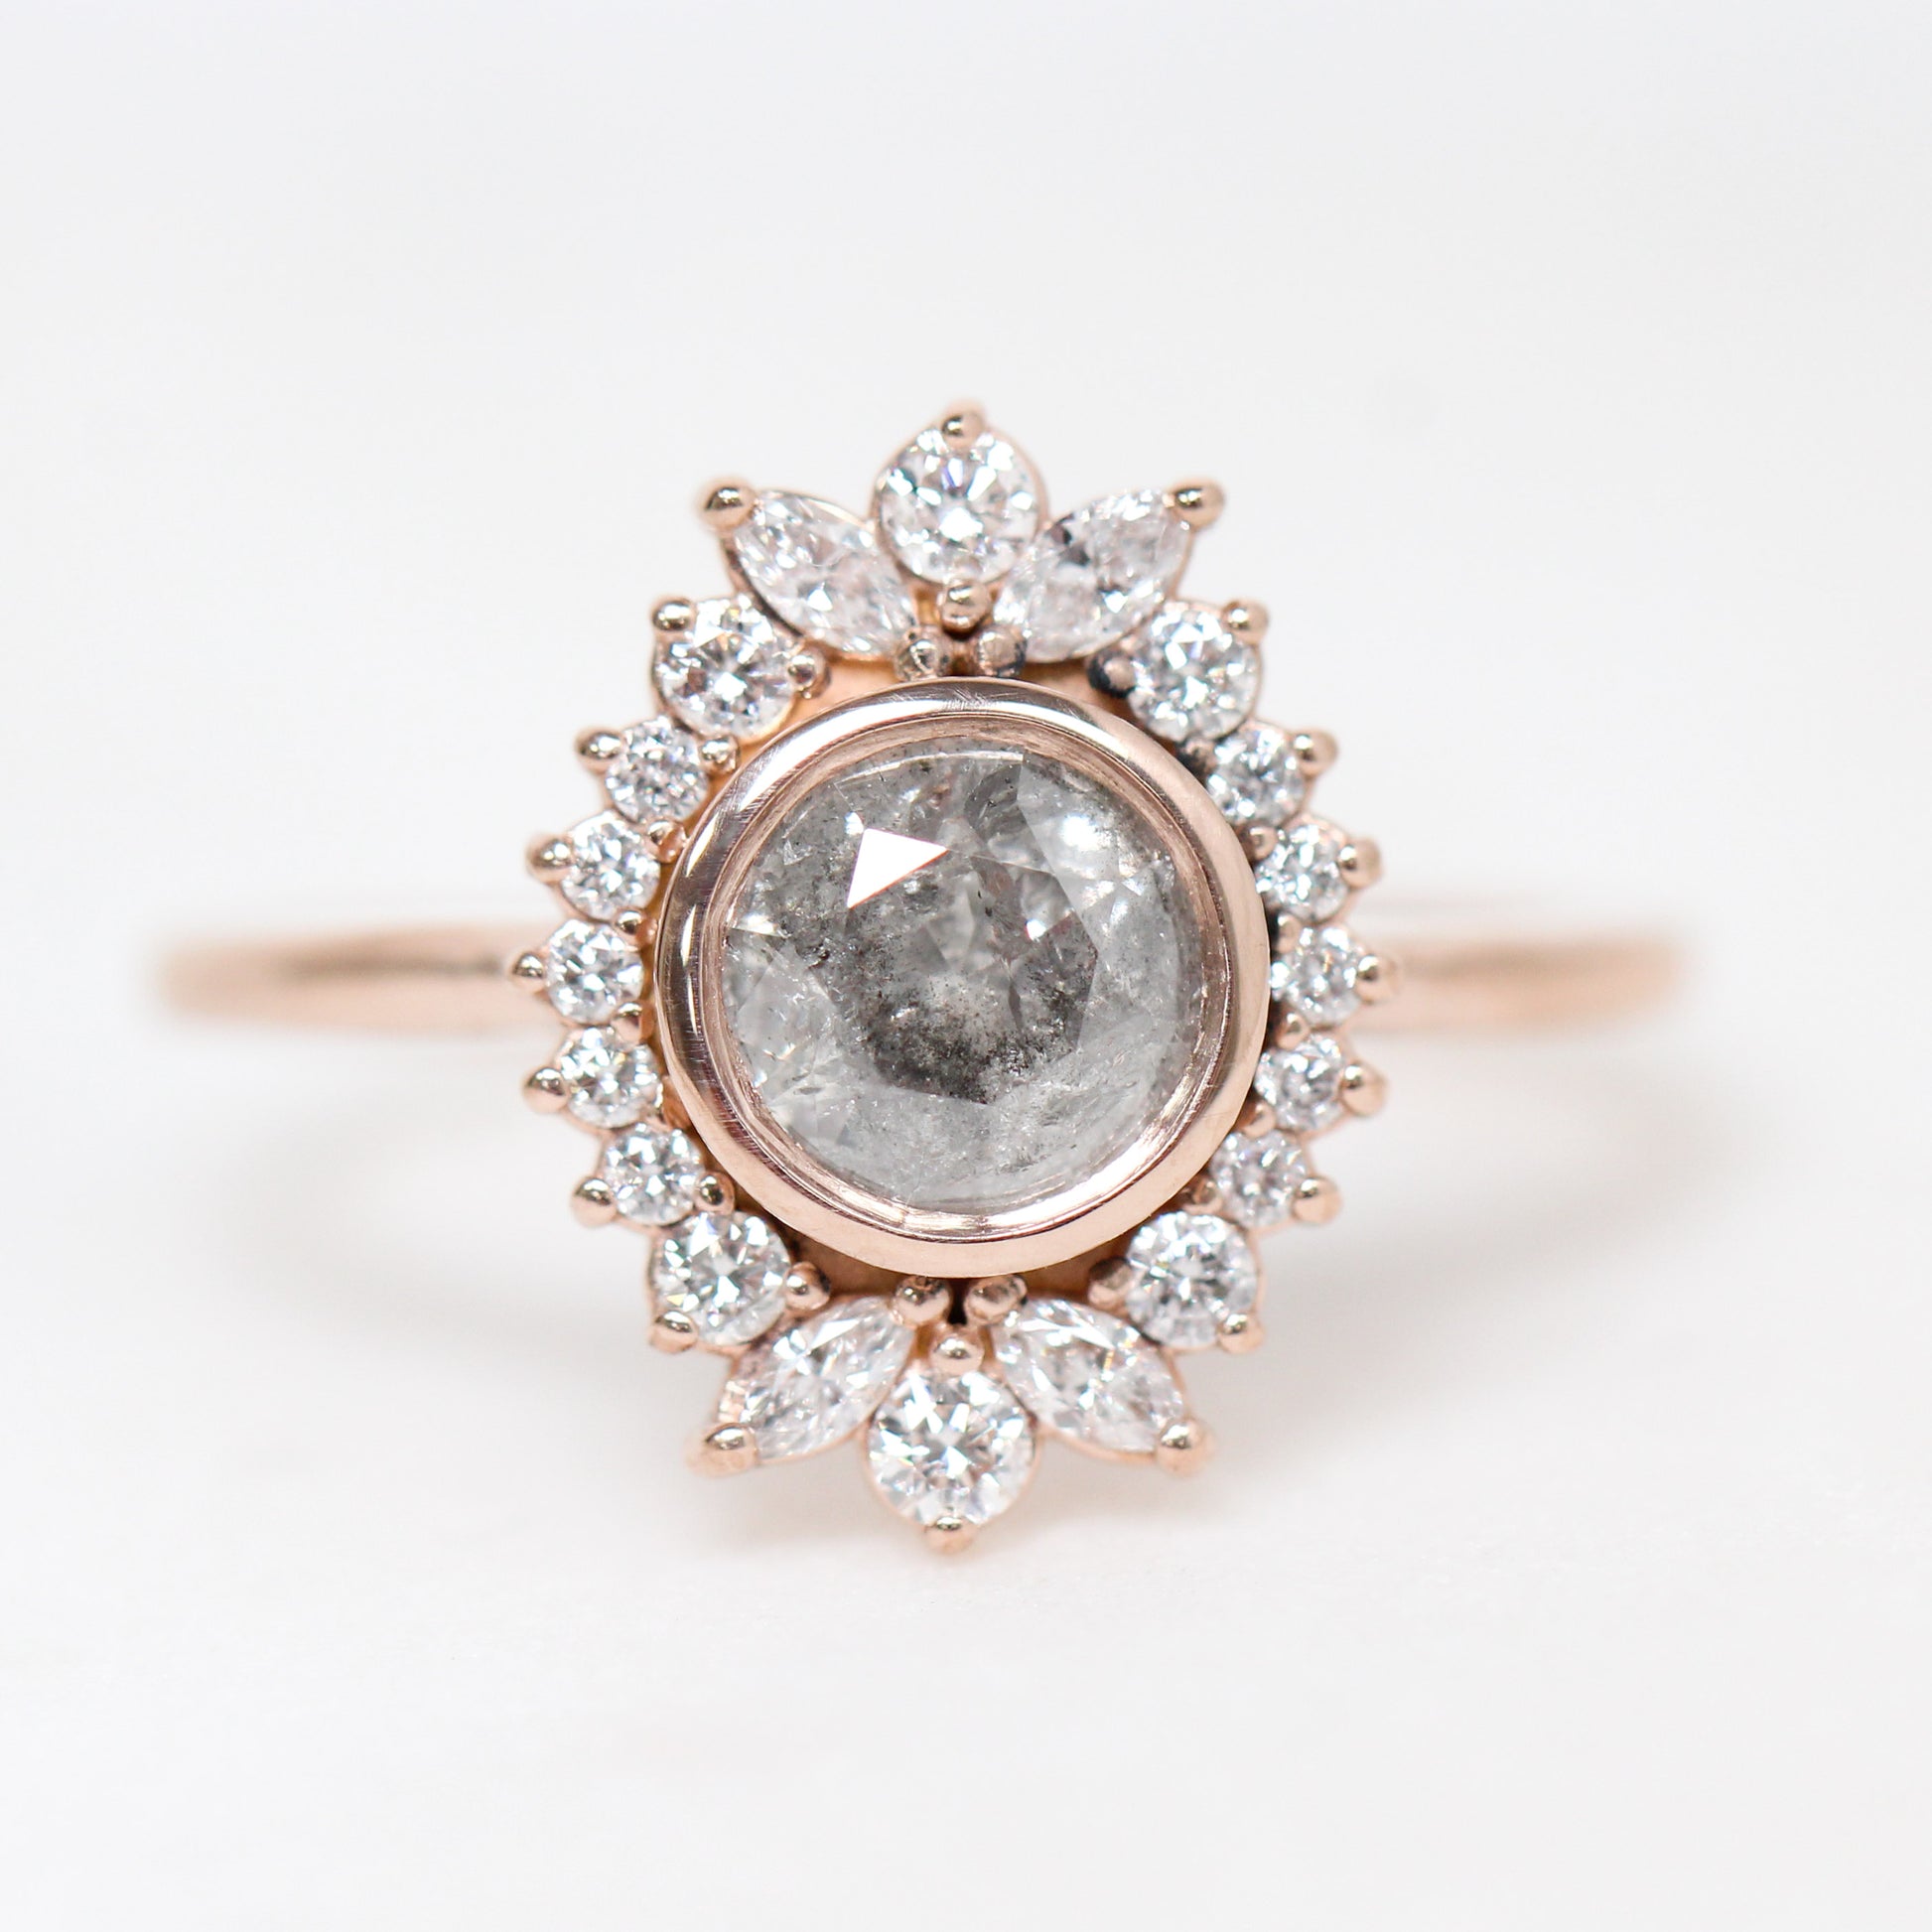 Juliette Ring with a 0.96 Gray Celestial Diamond in 10k Rose Gold - Ready to Size and Ship - Midwinter Co. Alternative Bridal Rings and Modern Fine Jewelry